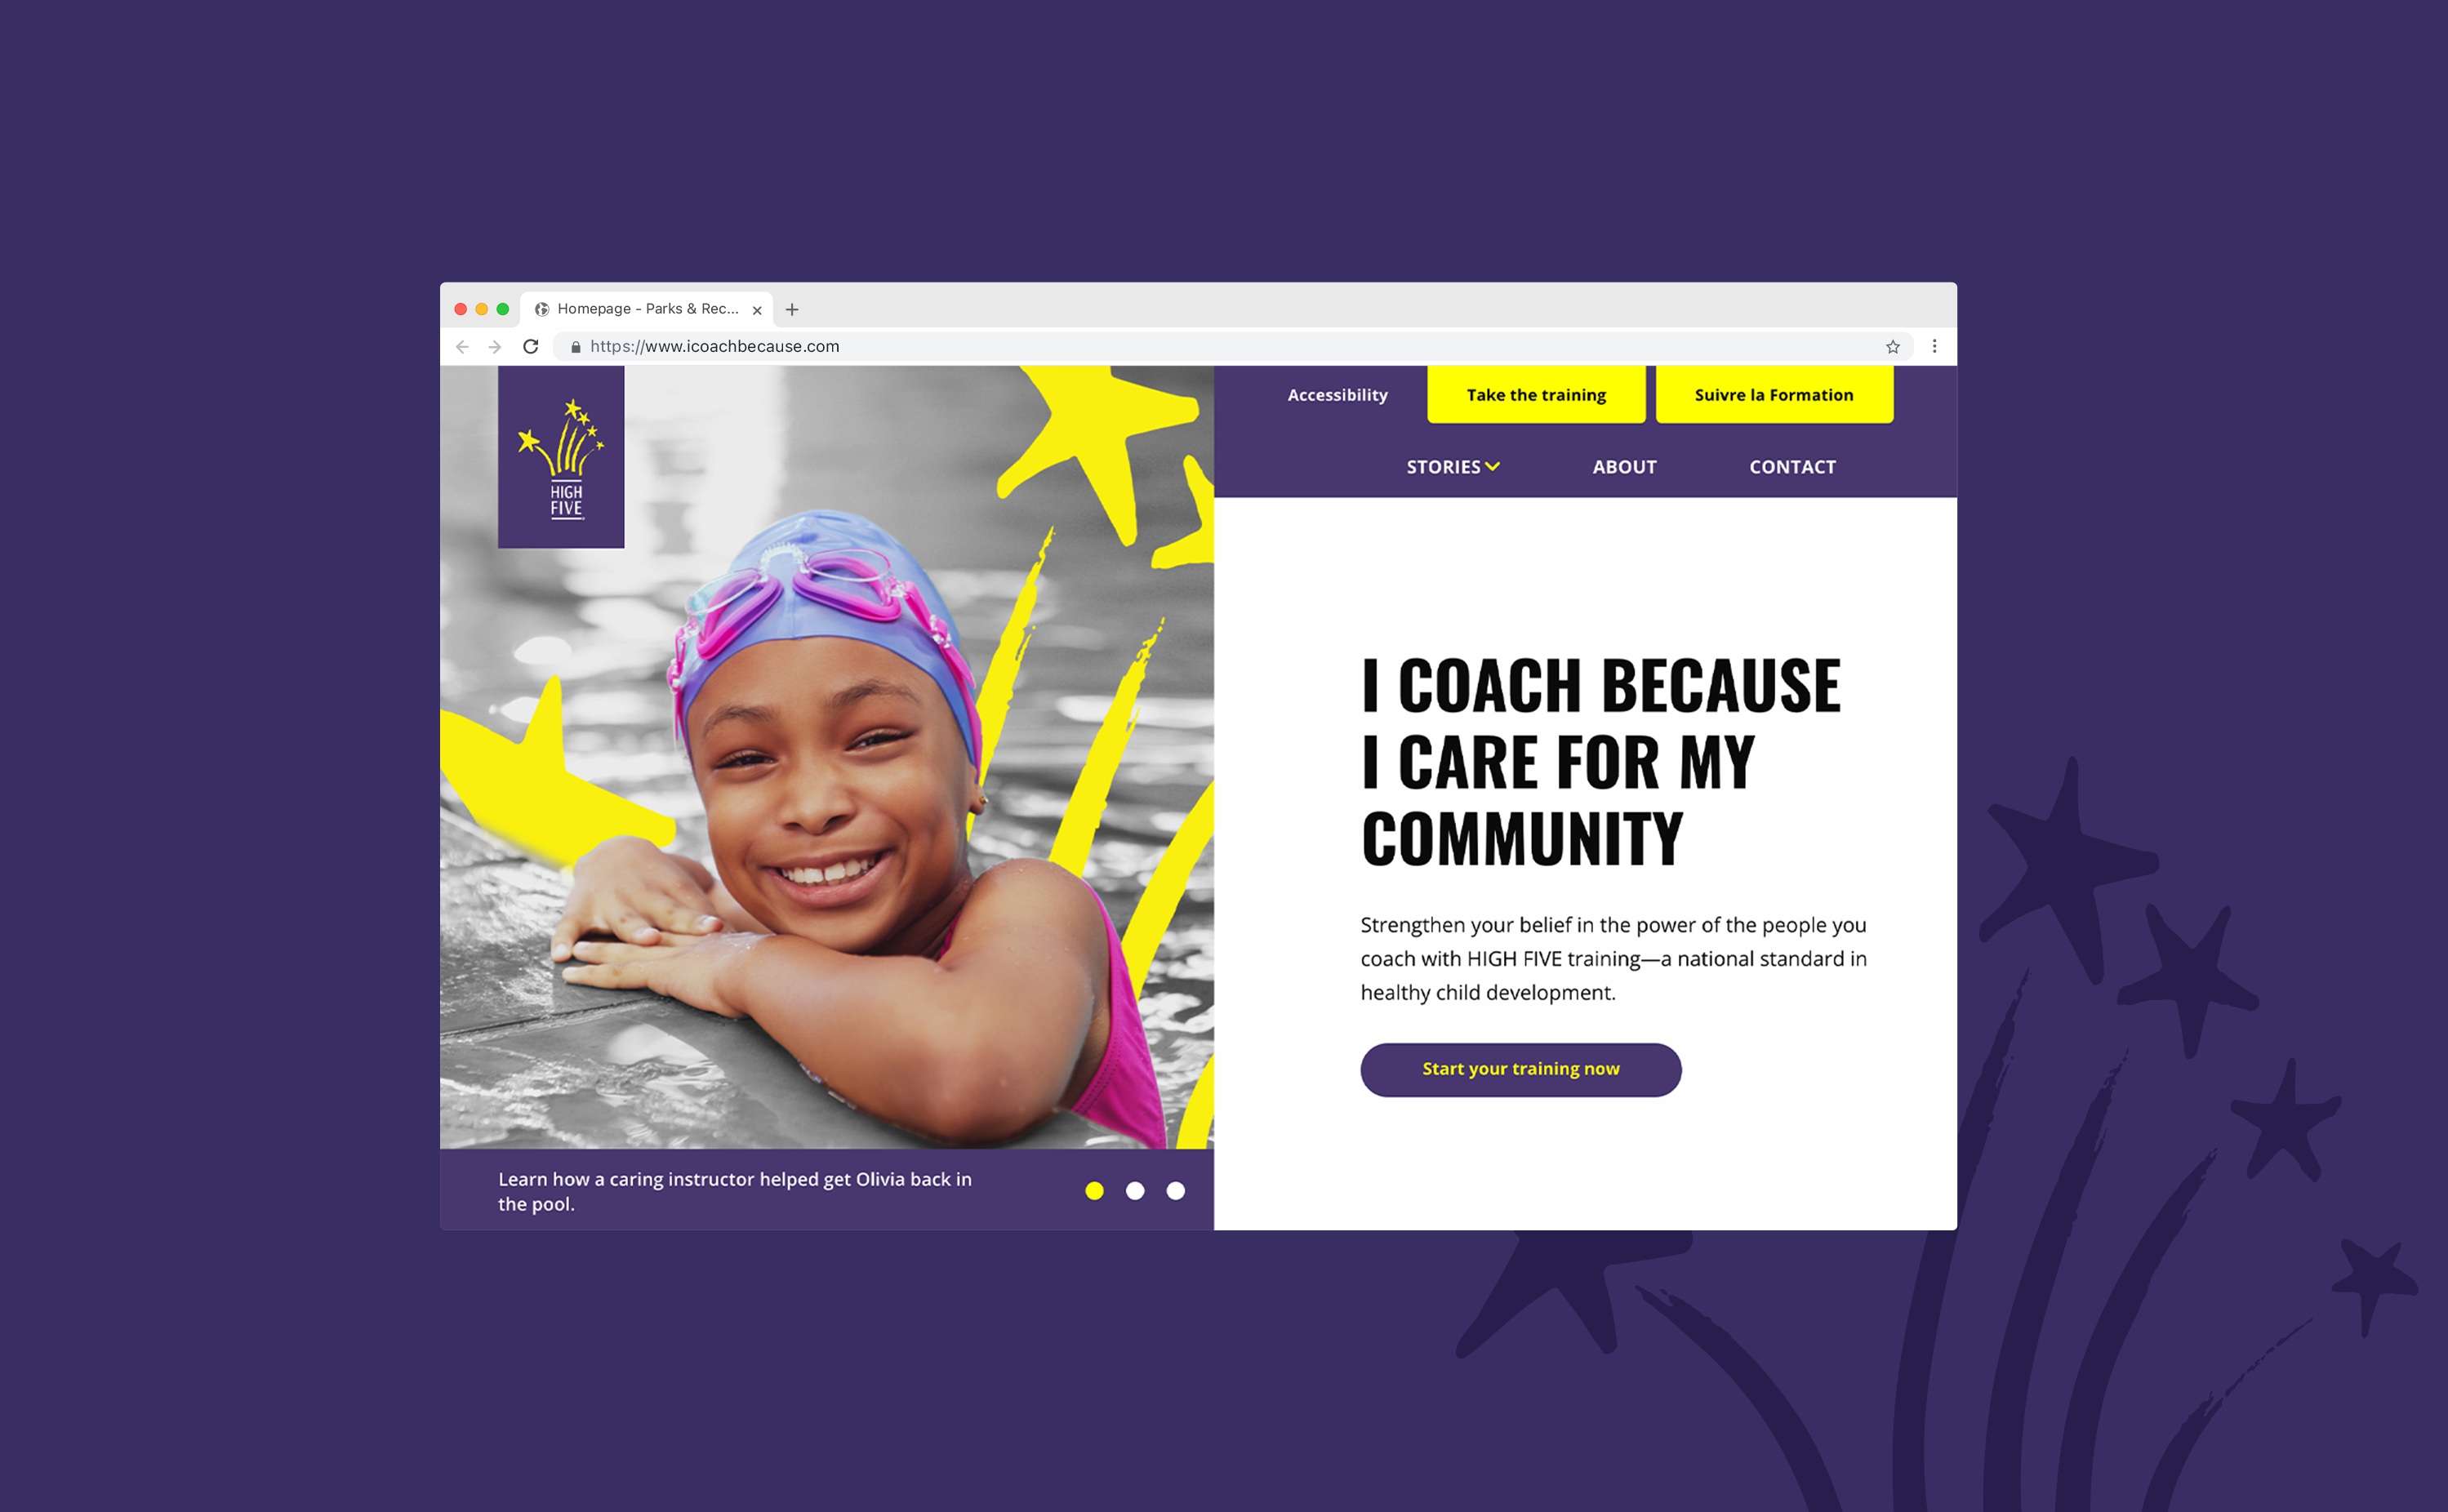 High Five Campaign Web Mockup - For Good Intent Marketing Campaign - Communications Agency for Non-Profit Organizations